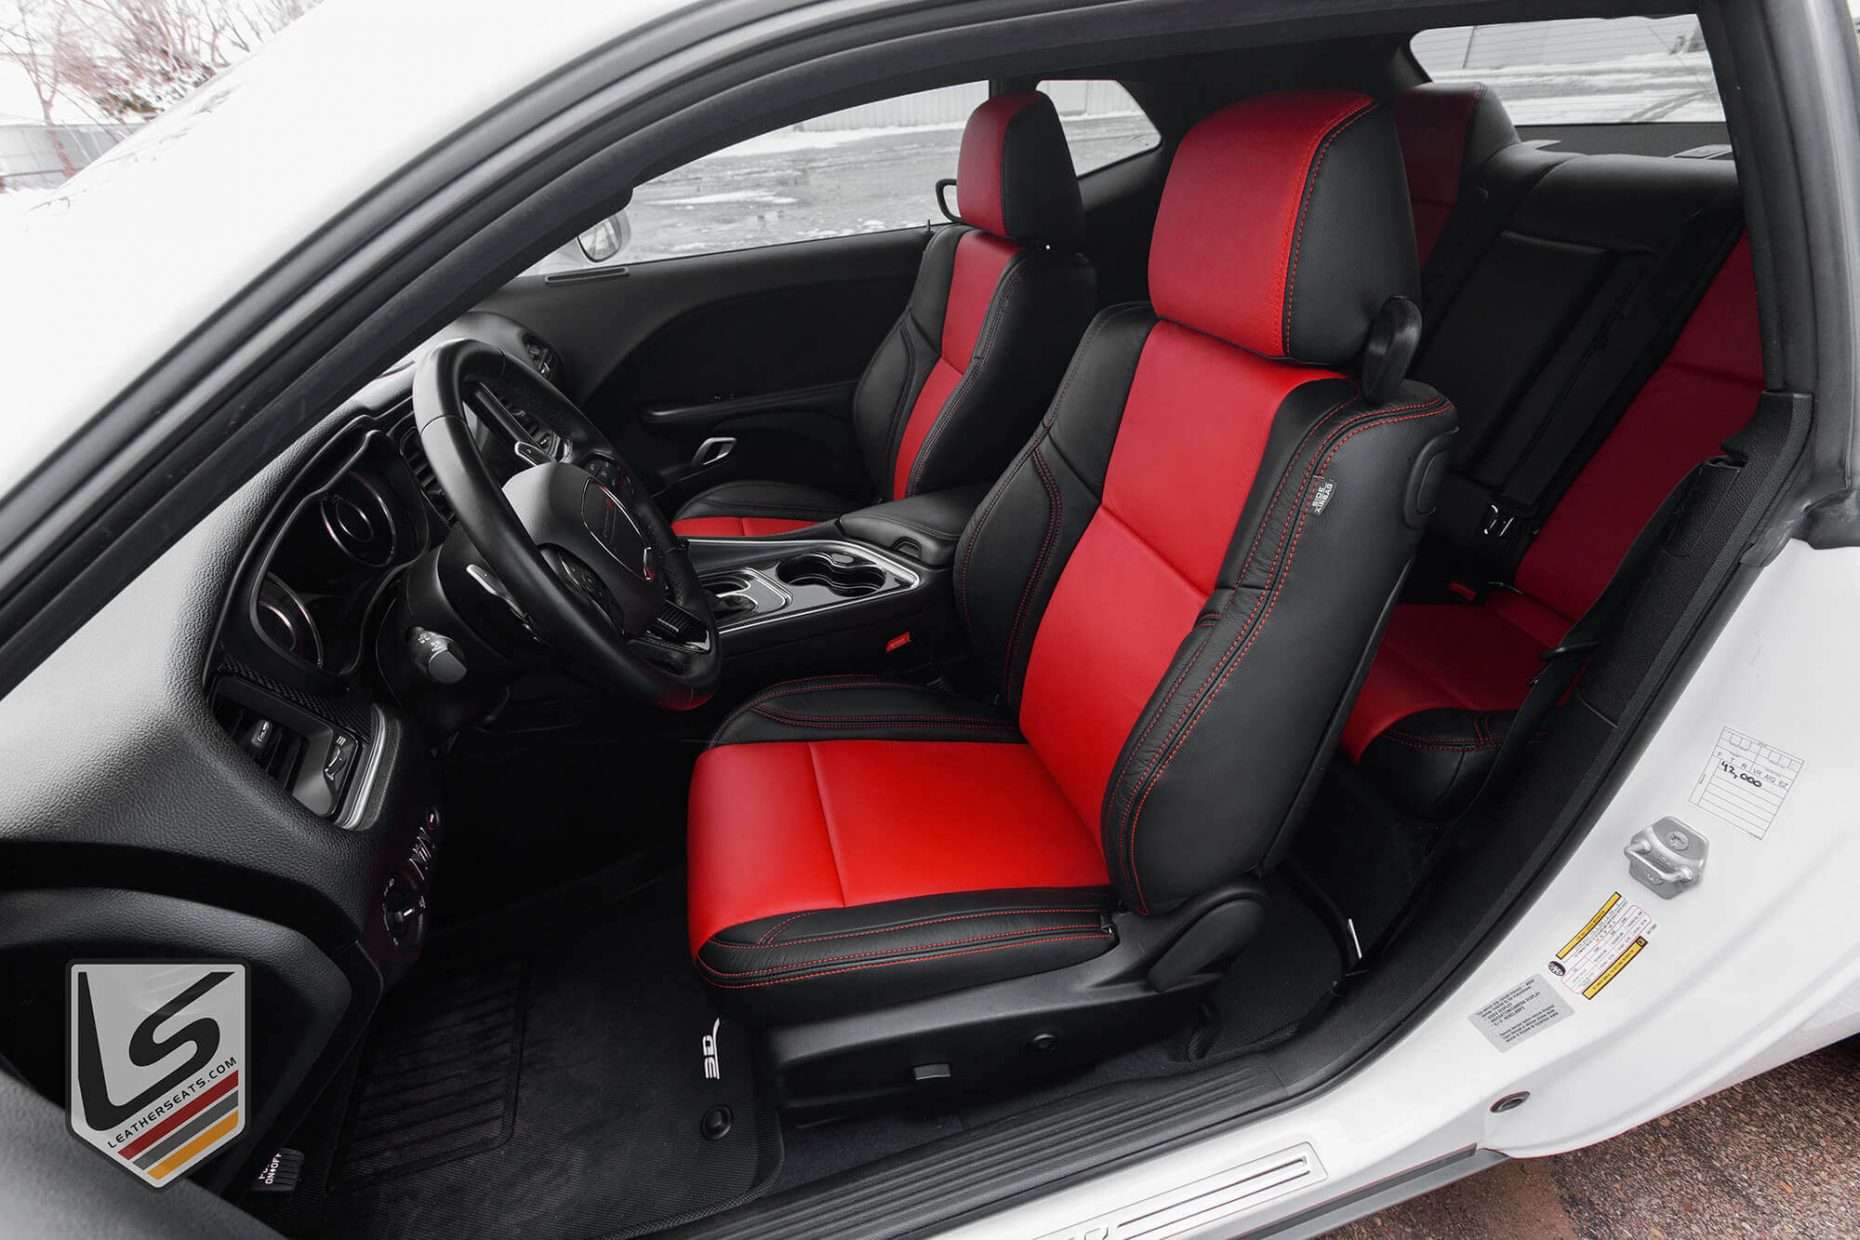 2015-2022 Dodge Challenger with leatherseats.com upholstery in Black and Bright Red - Front driver's seat